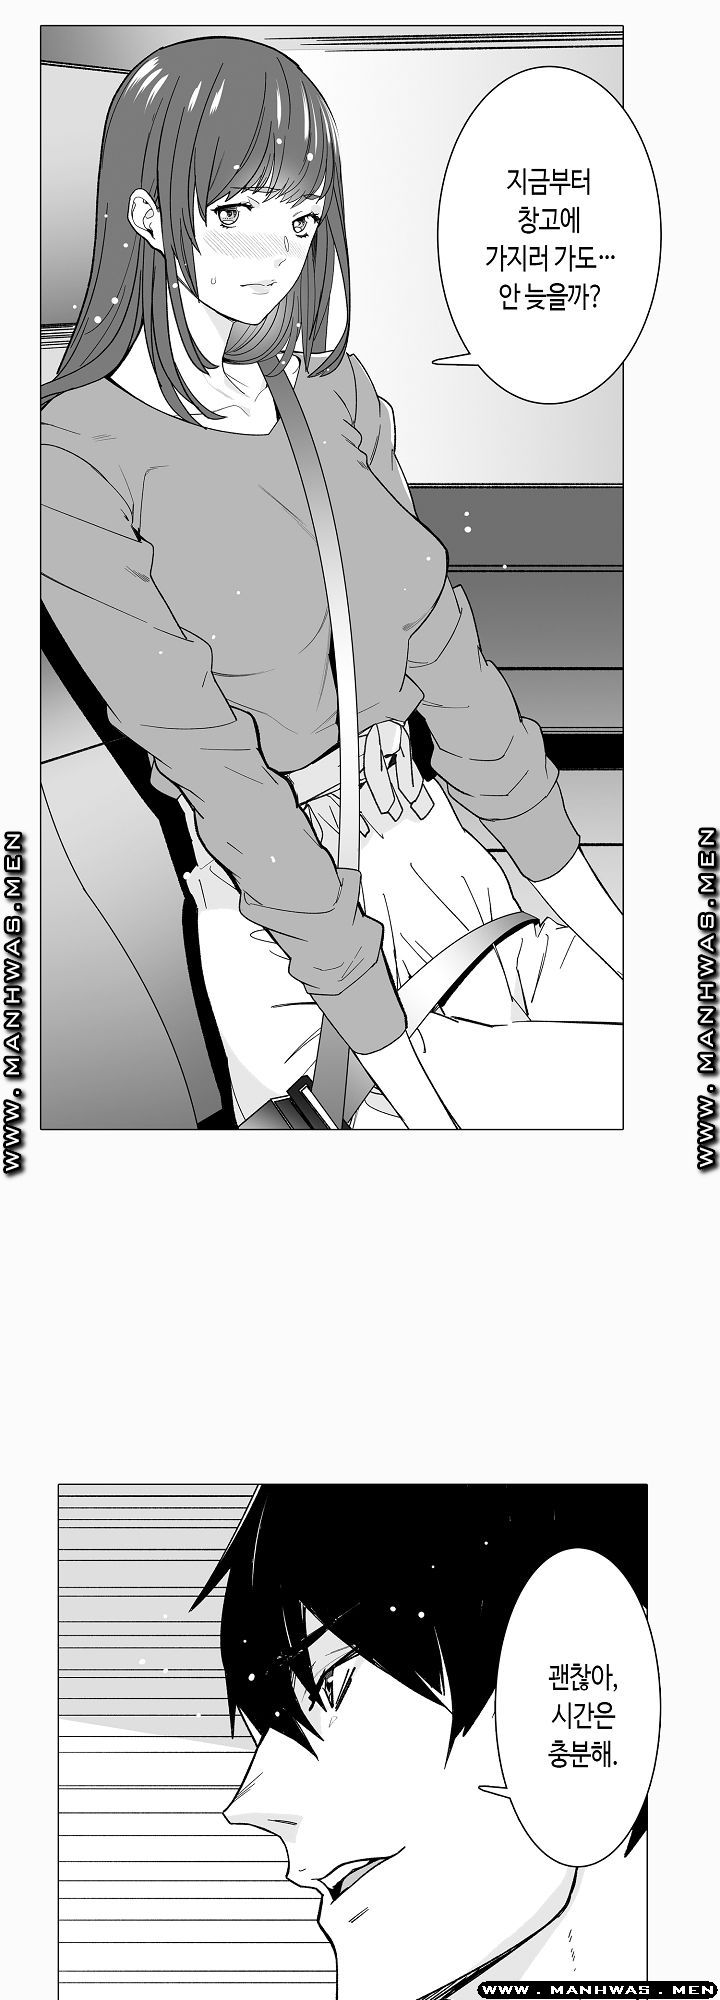 Please Let Me Go Home Raw - Chapter 10 Page 9